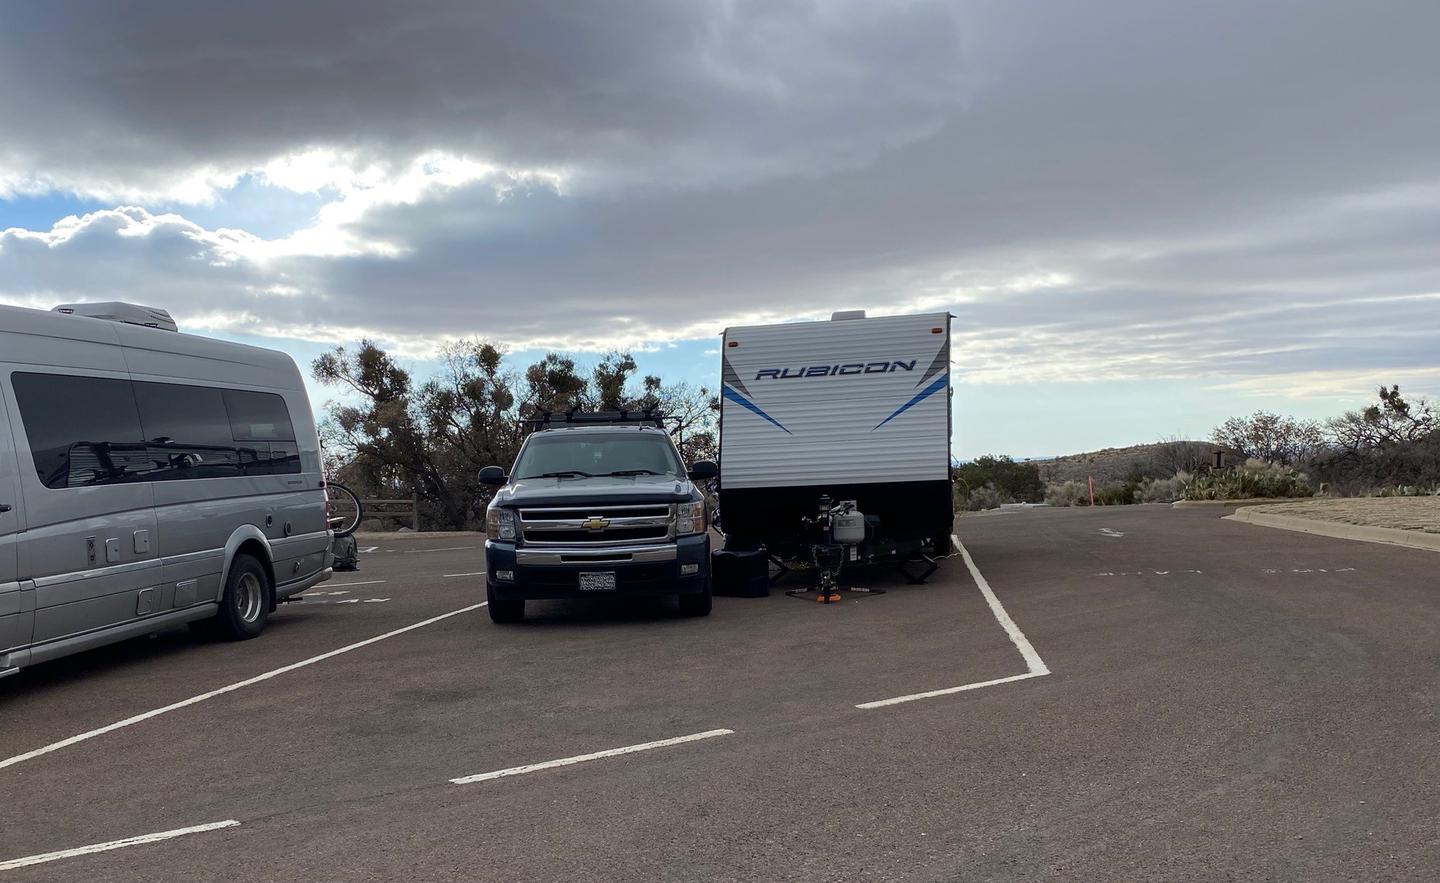 RV site 26 shown in this photo occupied by a camper trailer and truck.  Limited space is available on either side of site.RV site 26 while occupied with camper trailer and truck.